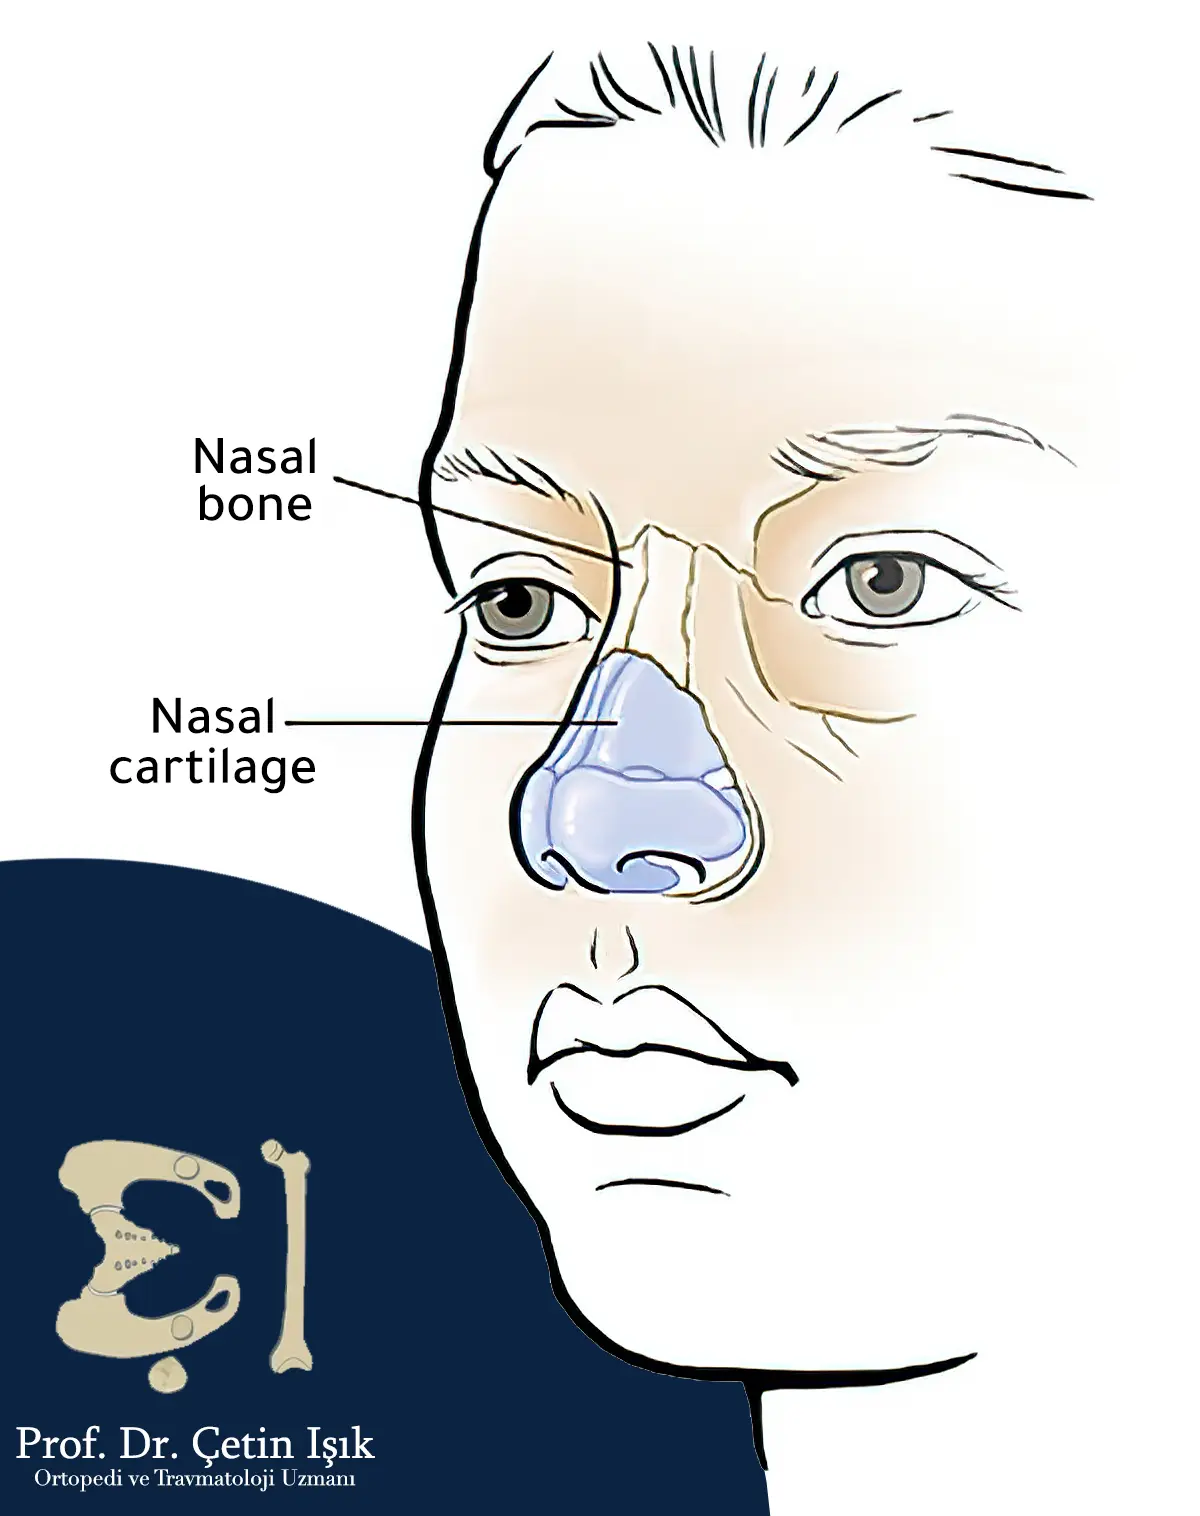 A picture showing the anatomy of the nose, as it consists of a bony part (upper) and a cartilaginous part (lower)